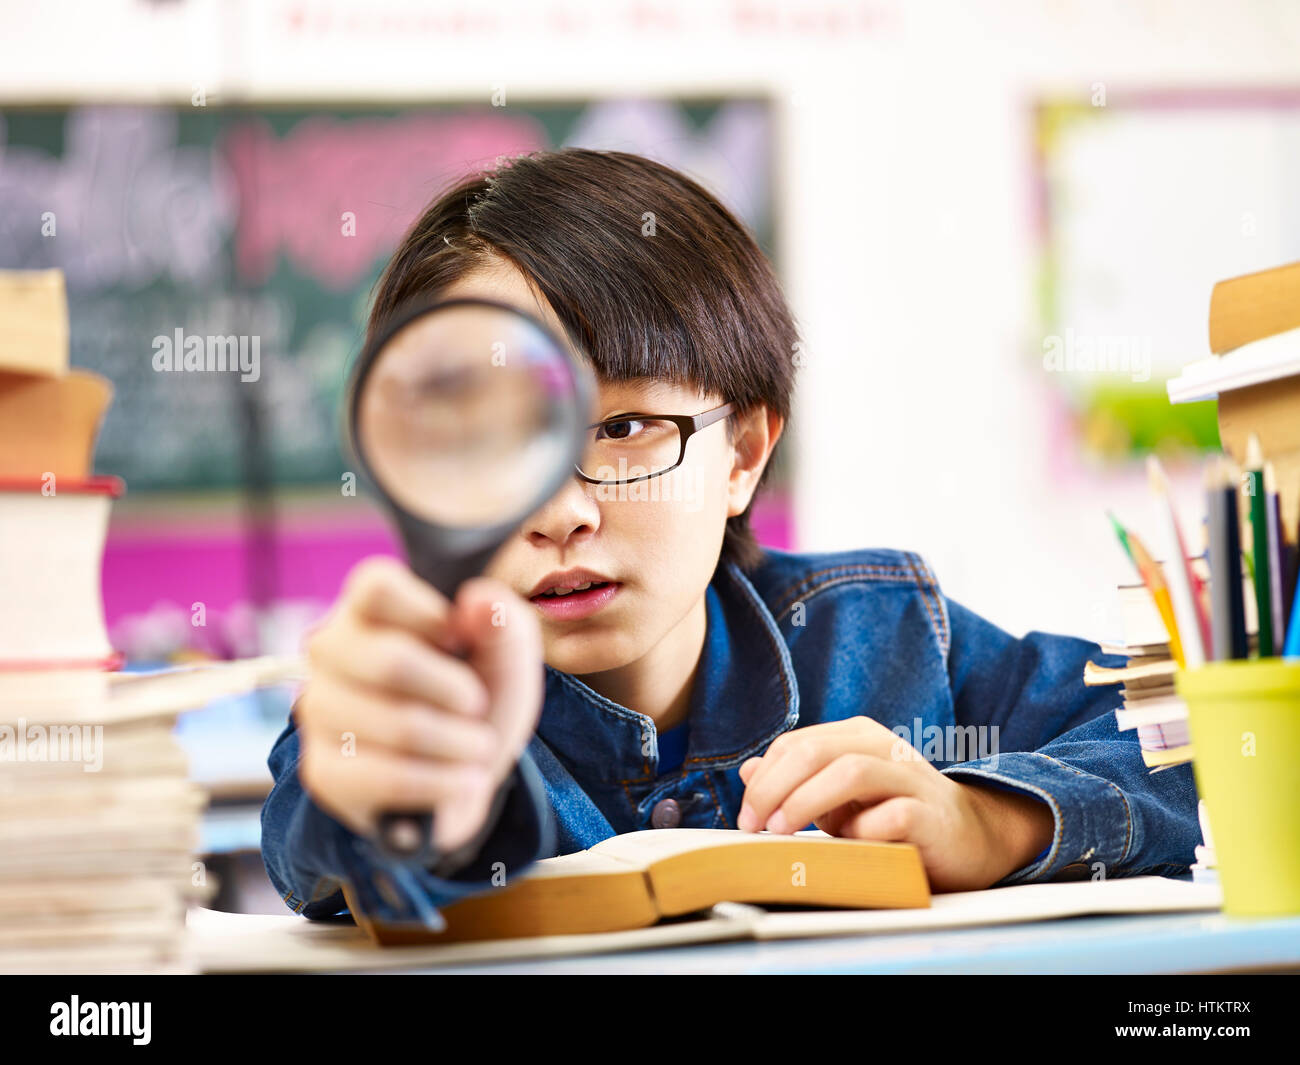 curious asian pupil holding a magnifier in front of one eye. Stock Photo